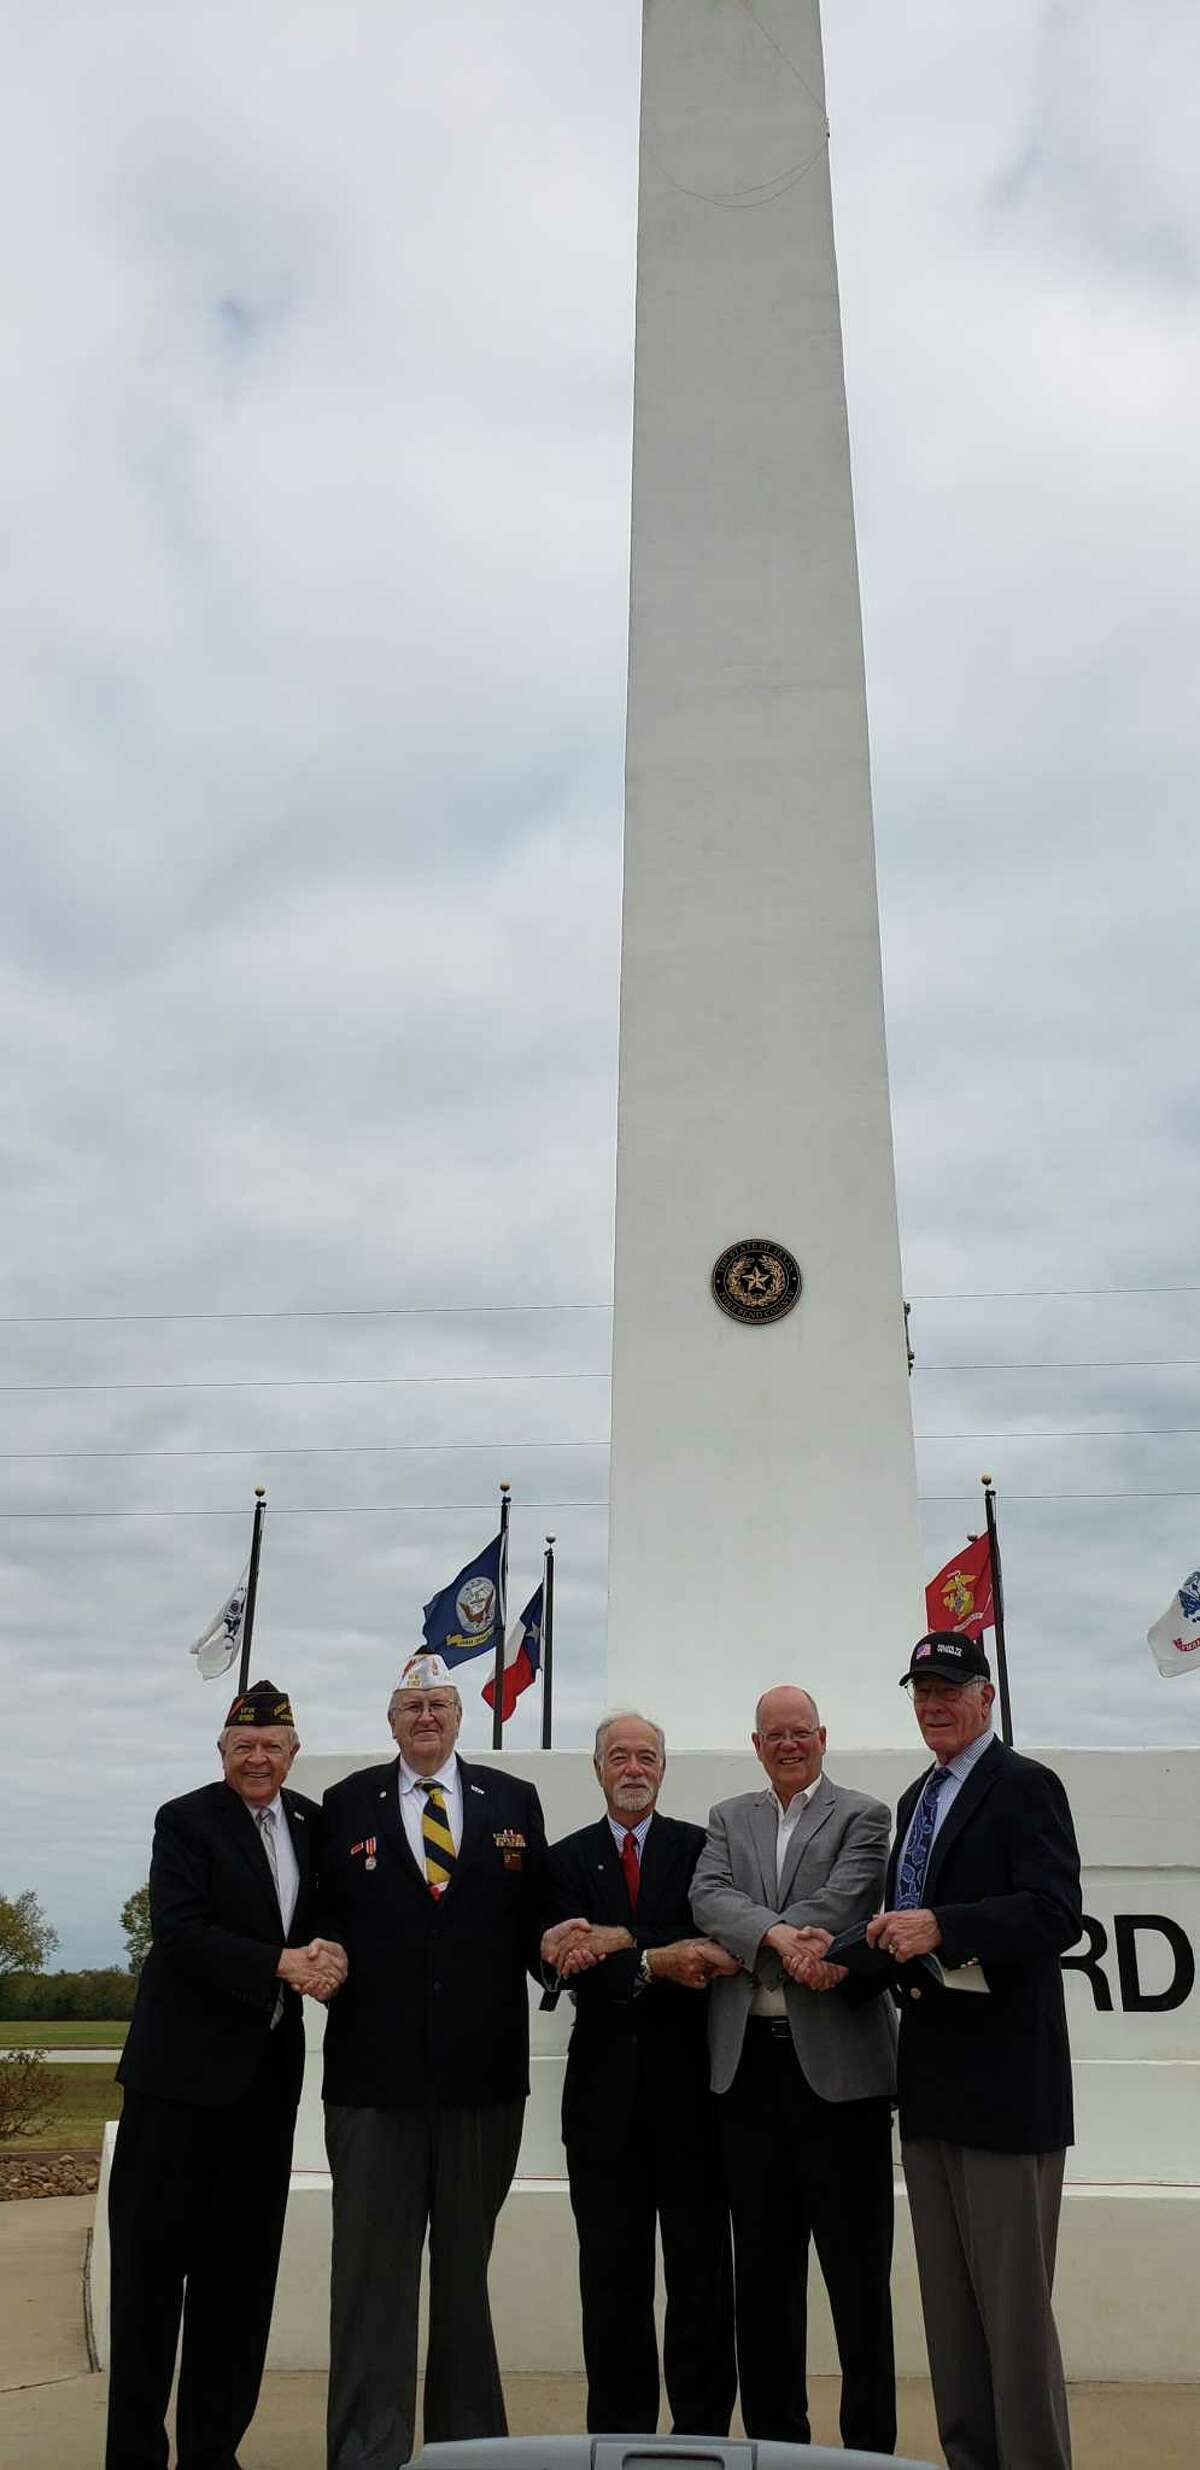 The Rotary Club of Katy and Katy Veterans of Foreign Wars Post 9182 observed Veterans Day on Nov. 11 at Armed Forces Memorial Tower in Fort Bend County Freedom Park. From left are: Ken Burton, Katy Rotarian; Don Byrne, VFW Post commander;  David Frishman, Katy Rotarian; Andy Meyers, Fort Bend County Precinct 3 commissioner; and Ron Hudson, colonel retired USACE.